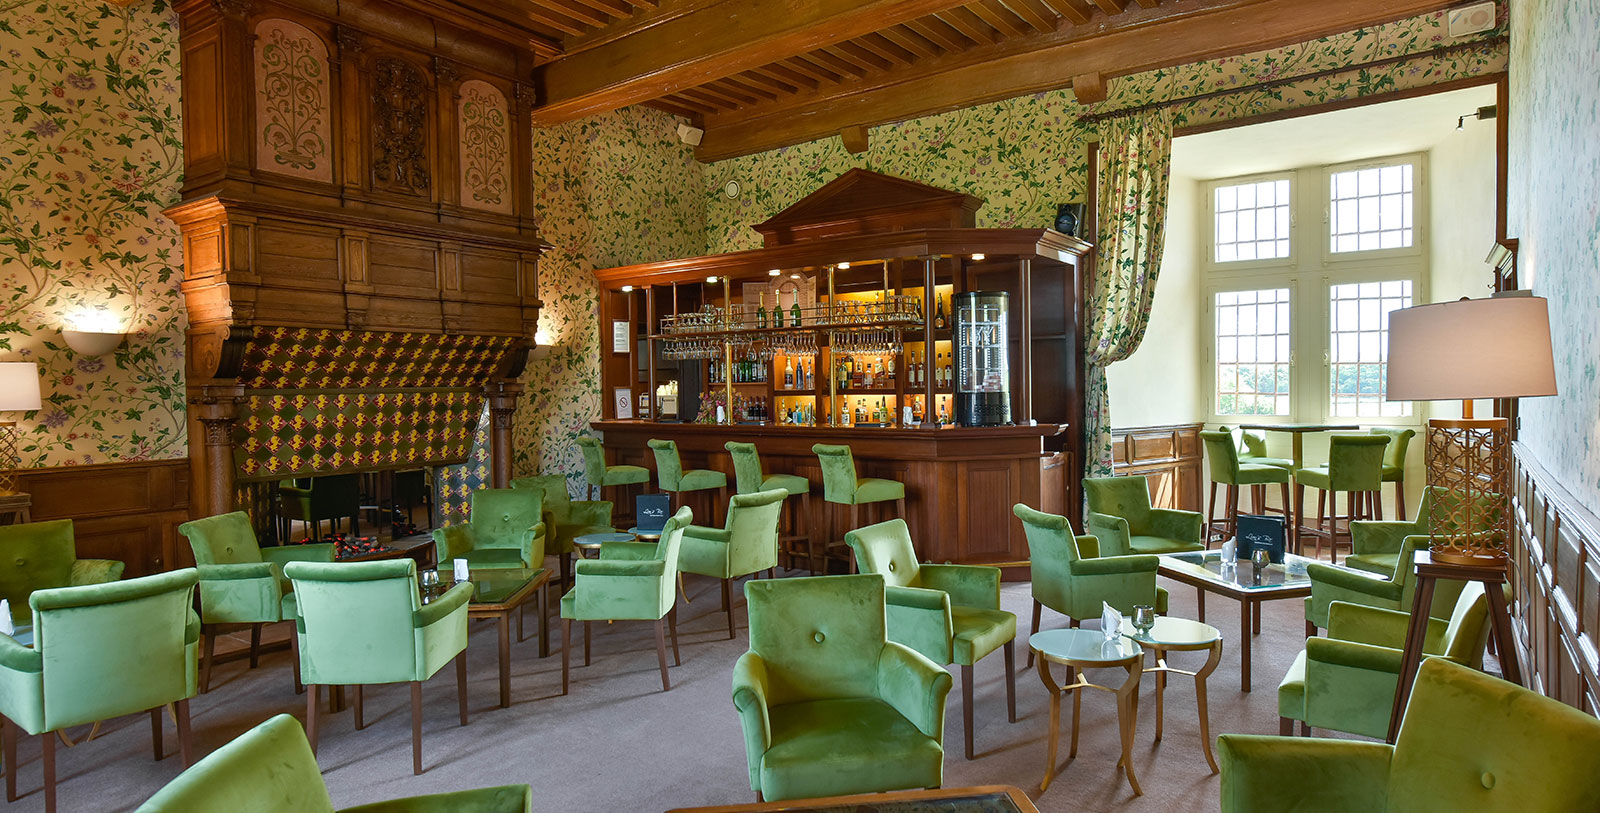 Image of The Lion's Bar at Hôtel Golf Château de Chailly, 16th century, a member of Historic Hotels Worldwide in Chailly-sur-Armançon, Burgundy, France